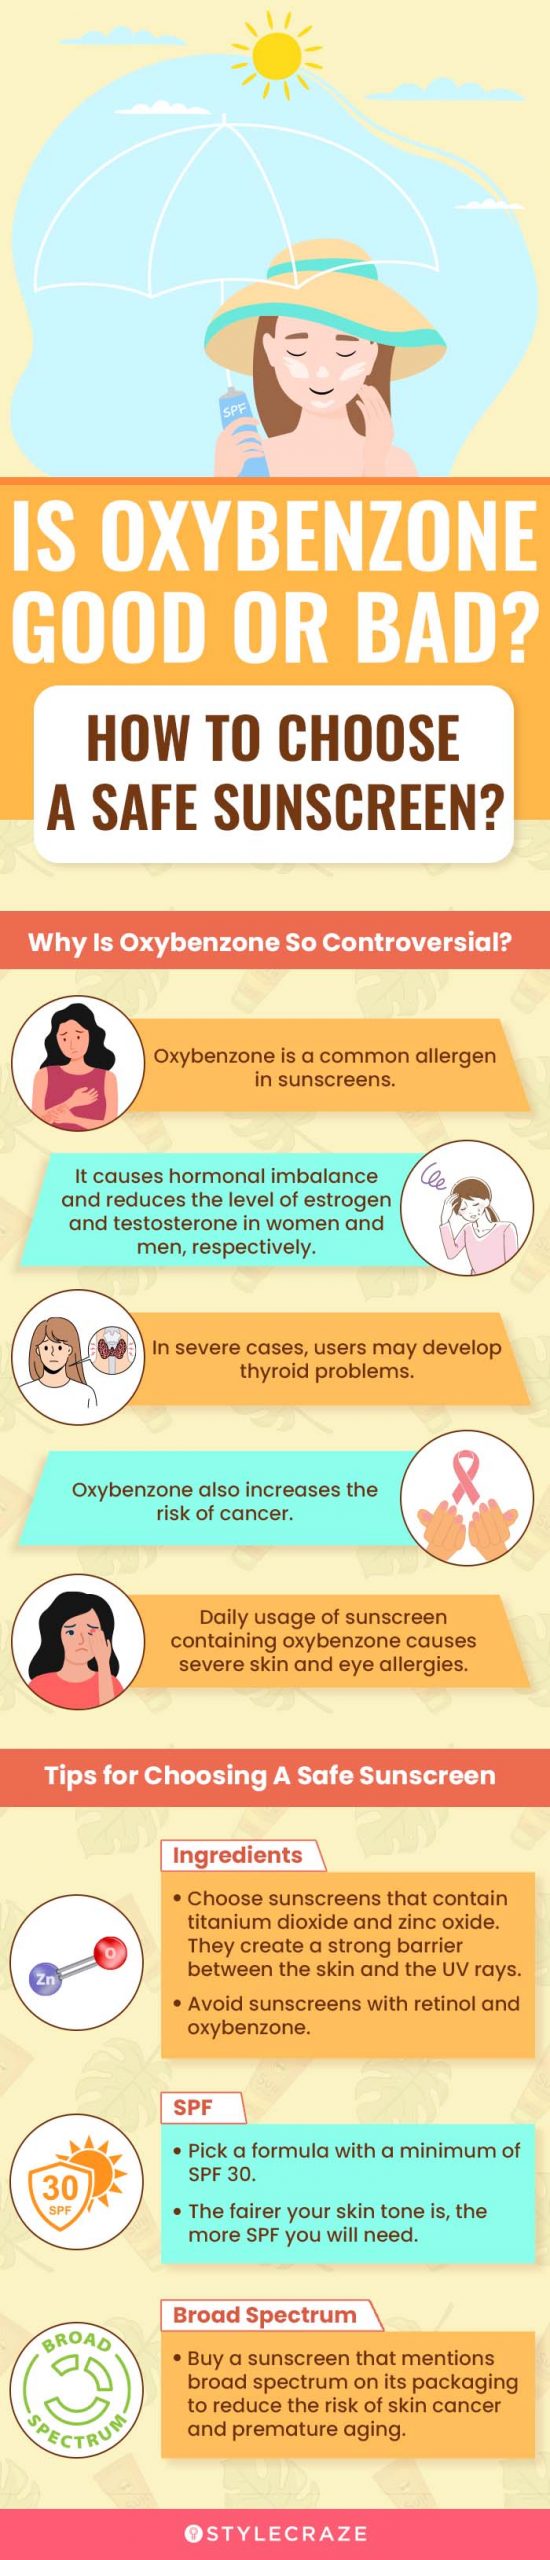 Is Oxybenzone Good Or Bad? Sunscreen (infographic)